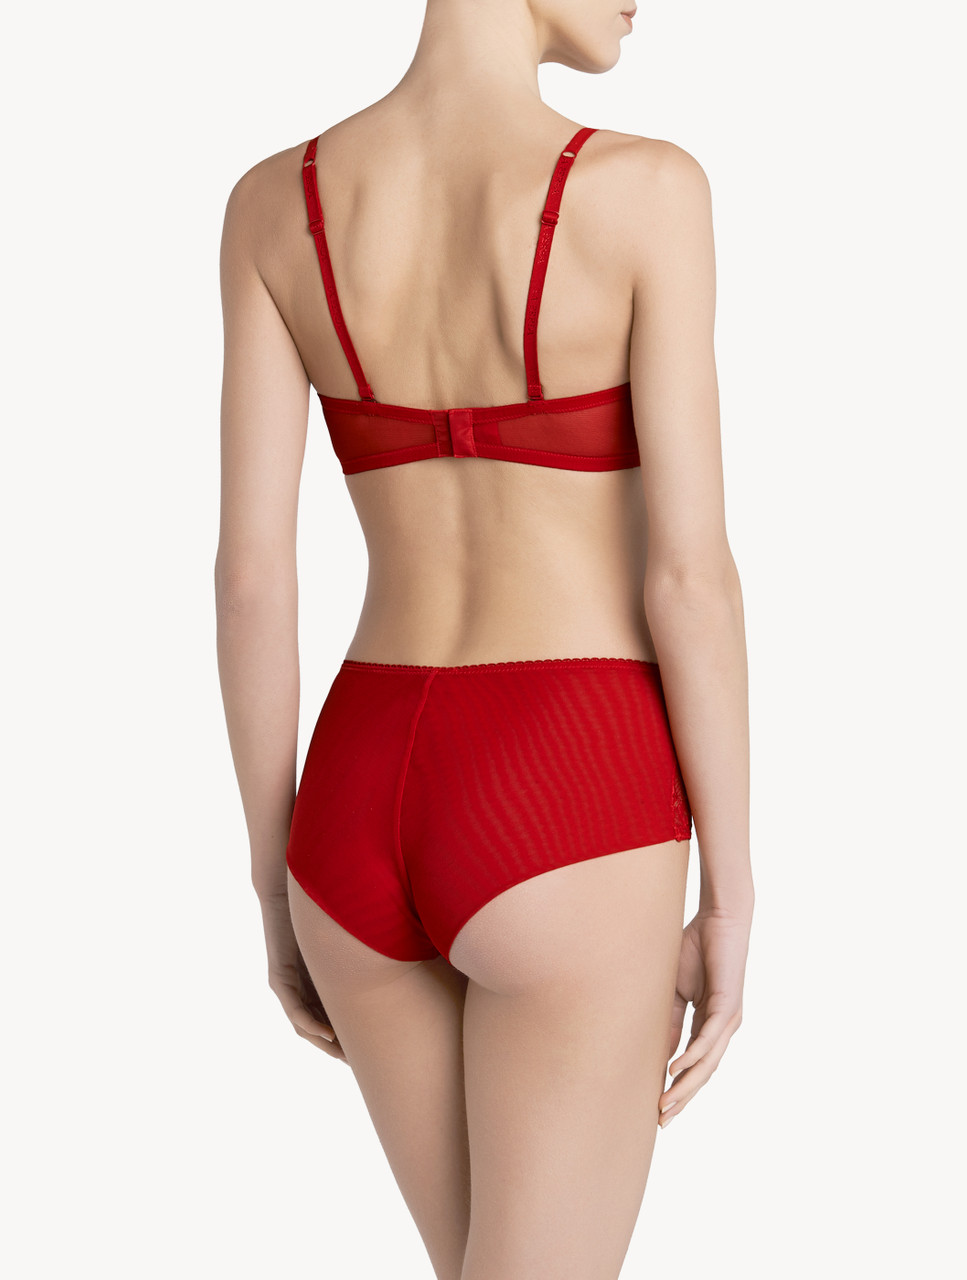 Soft balconette bra with luxurious red french lace Mediolano Harmony Red  19125 buy at best prices with international delivery in the catalog of the  online store of lingerie